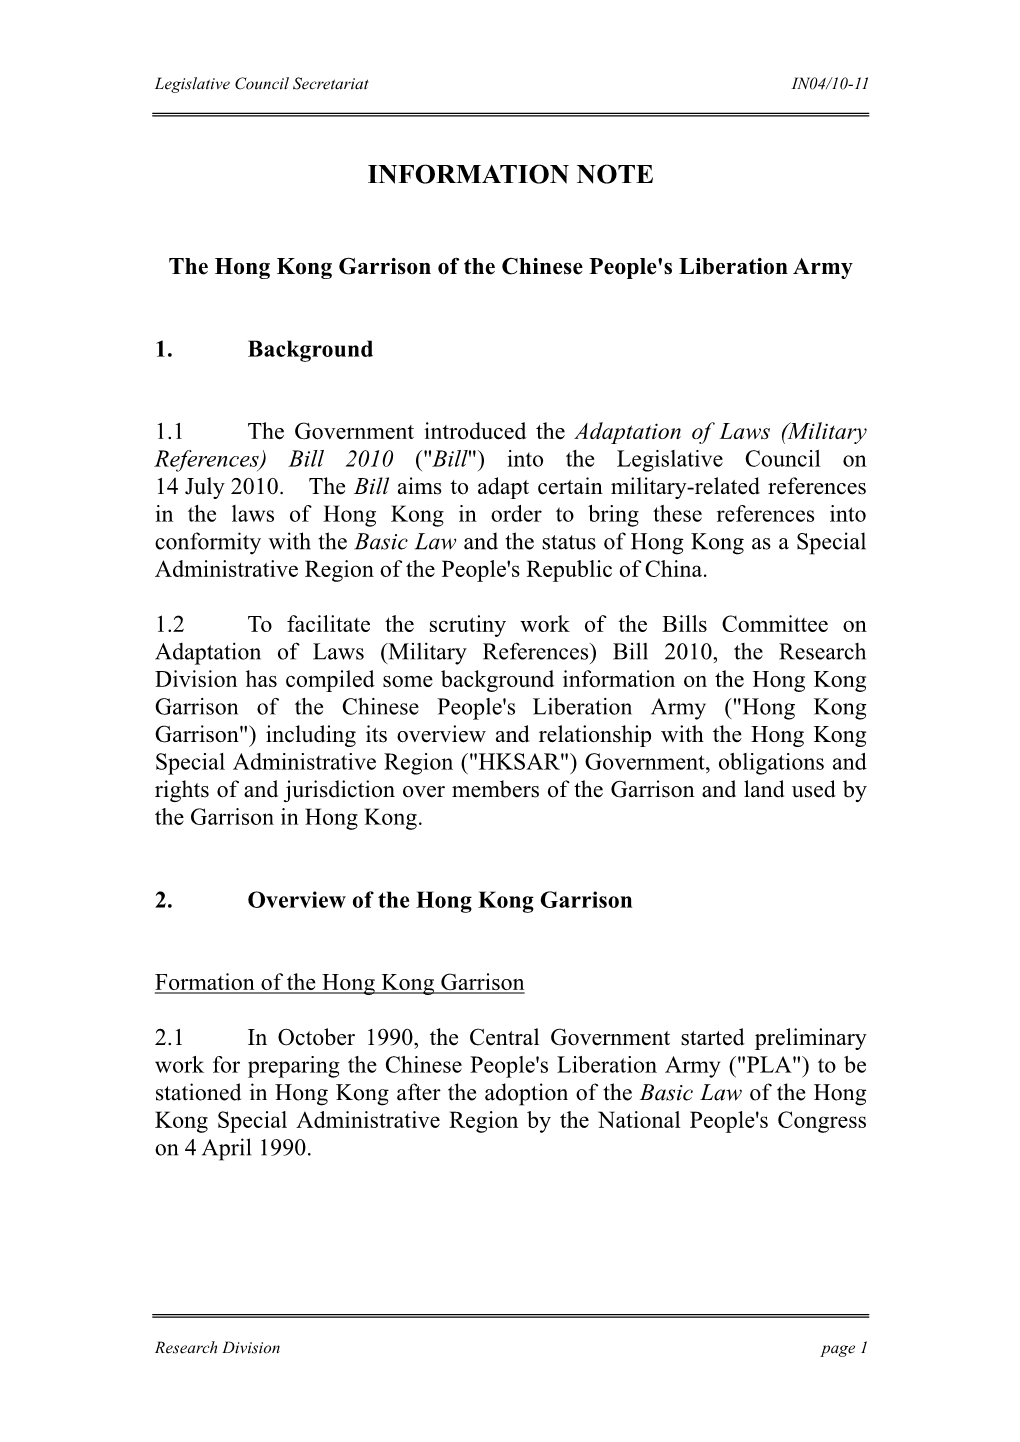 The Hong Kong Garrison of the Chinese People's Liberation Army